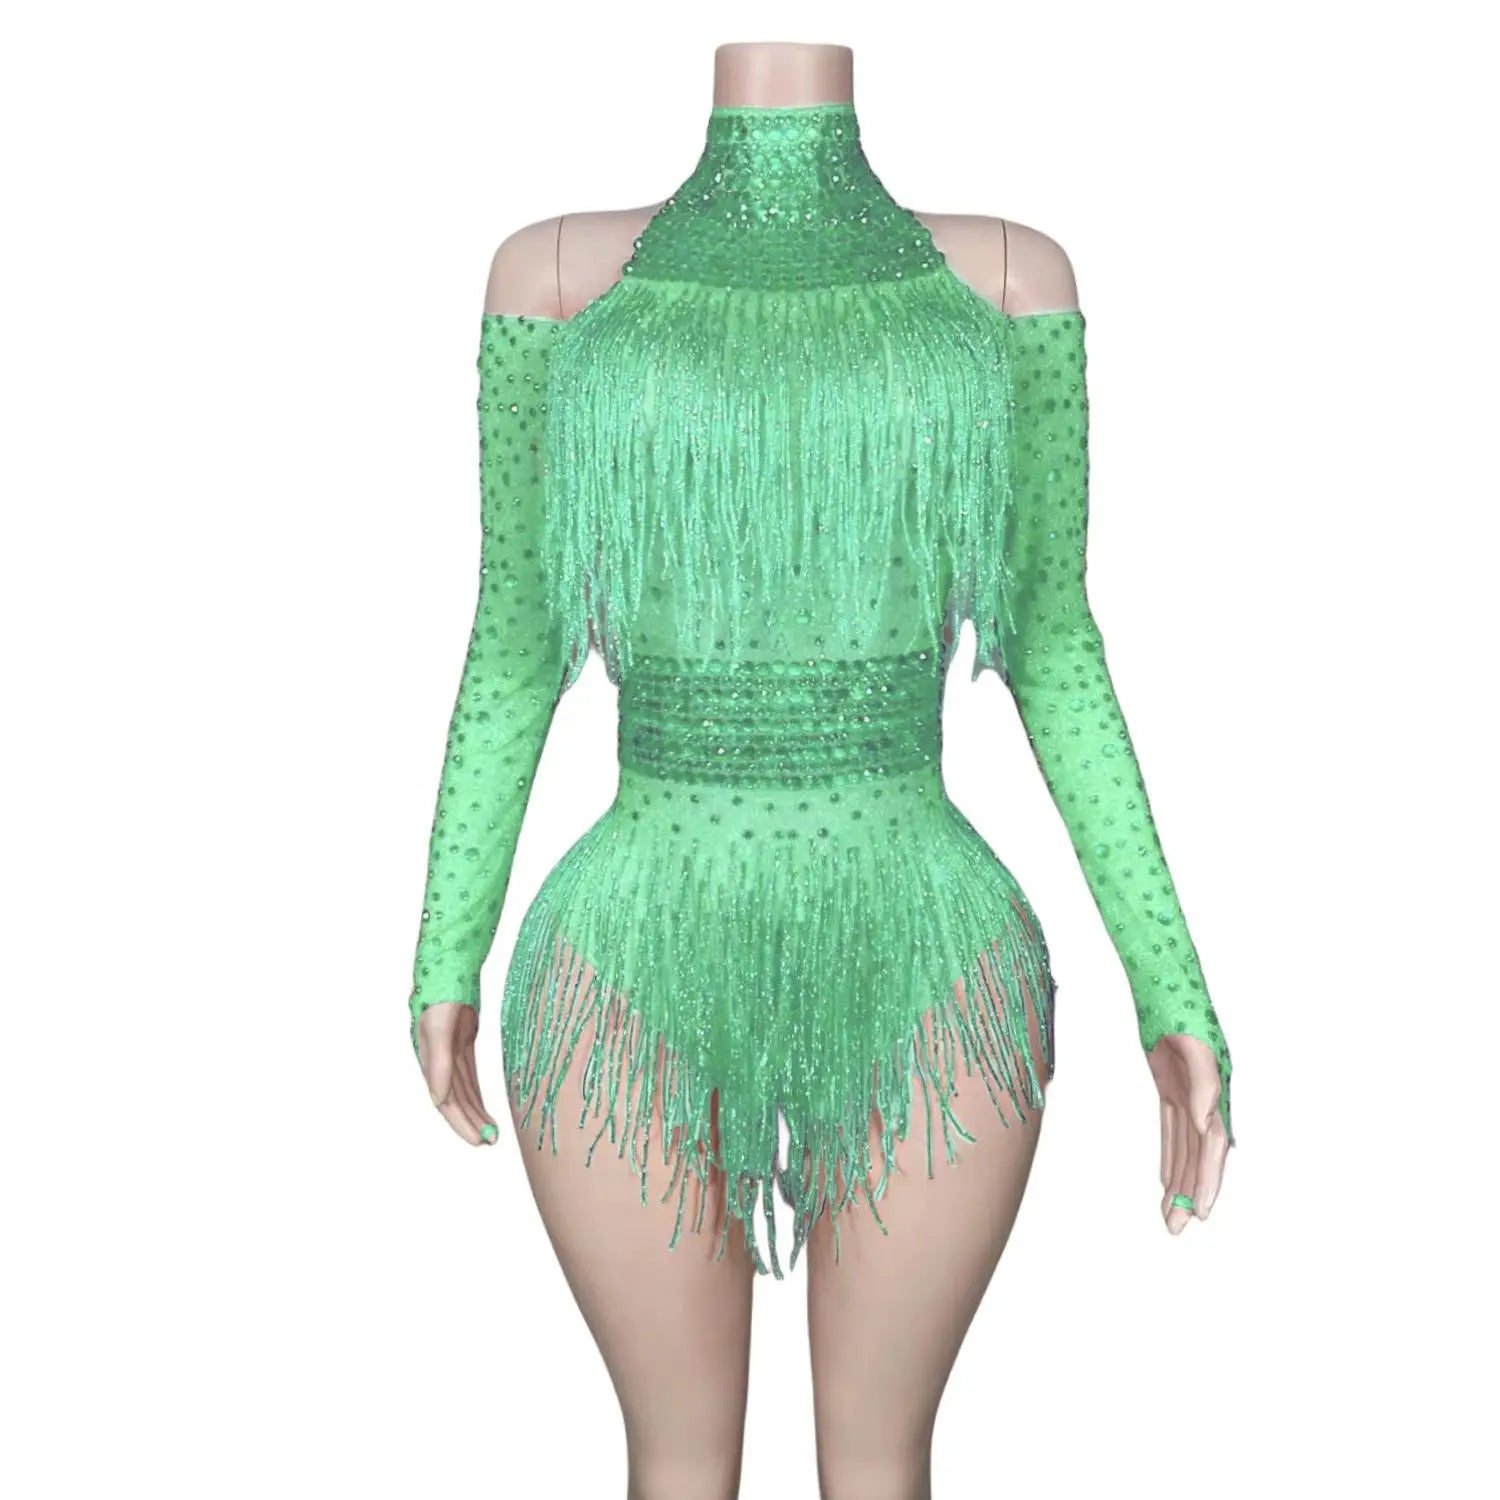 Fringe Stretch Rhinestone Body Suits for Women Long Sleeve Party Drag Queen Bodysuits Stage Wear Night Dance Costume